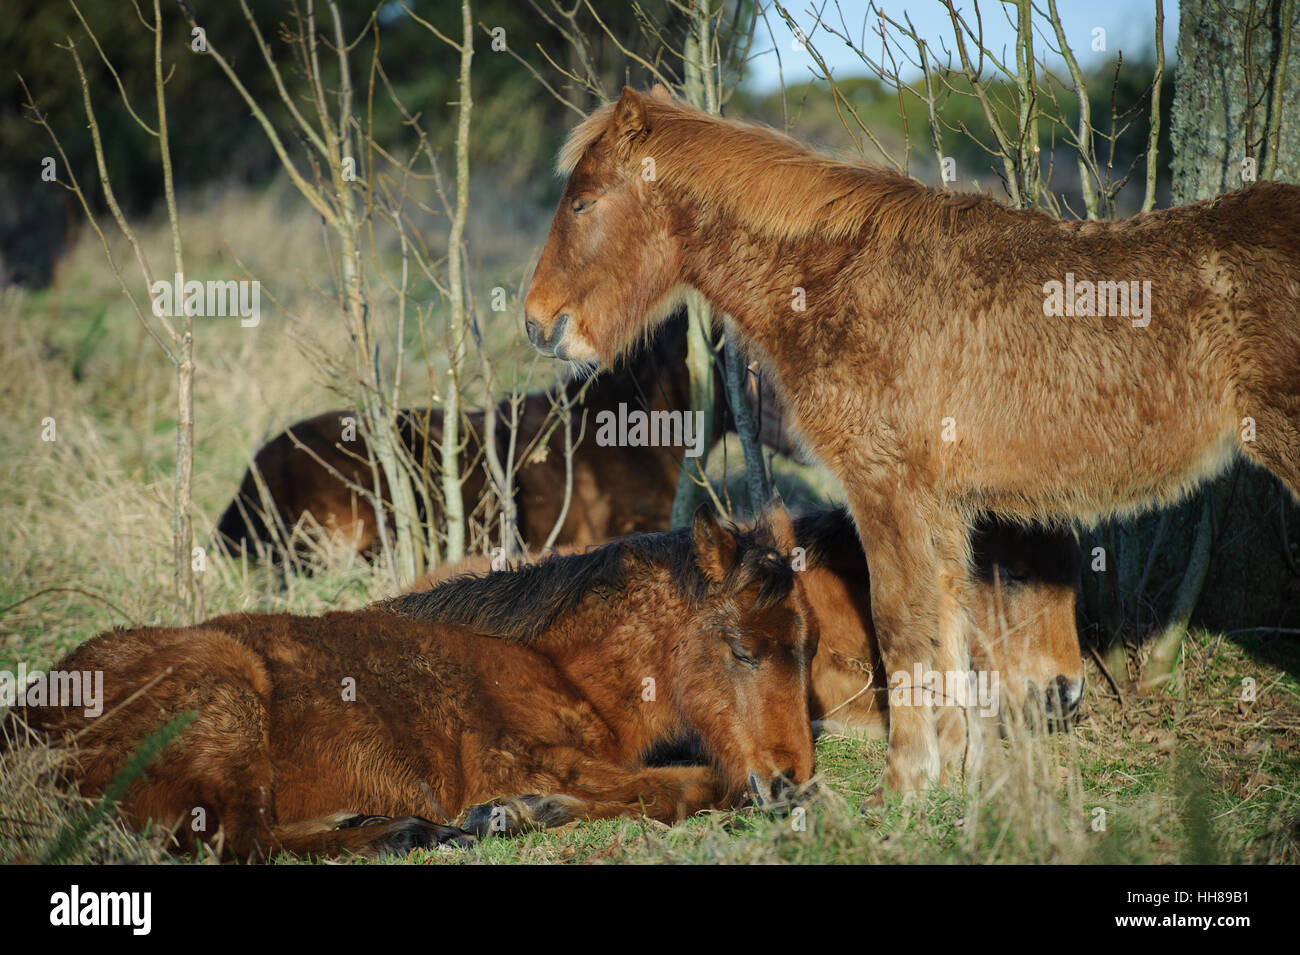 Ponies warm themselves in the winter sun on a cold day at Cissbury Ring in the South Downs National Park, West Sussex, England. Stock Photo